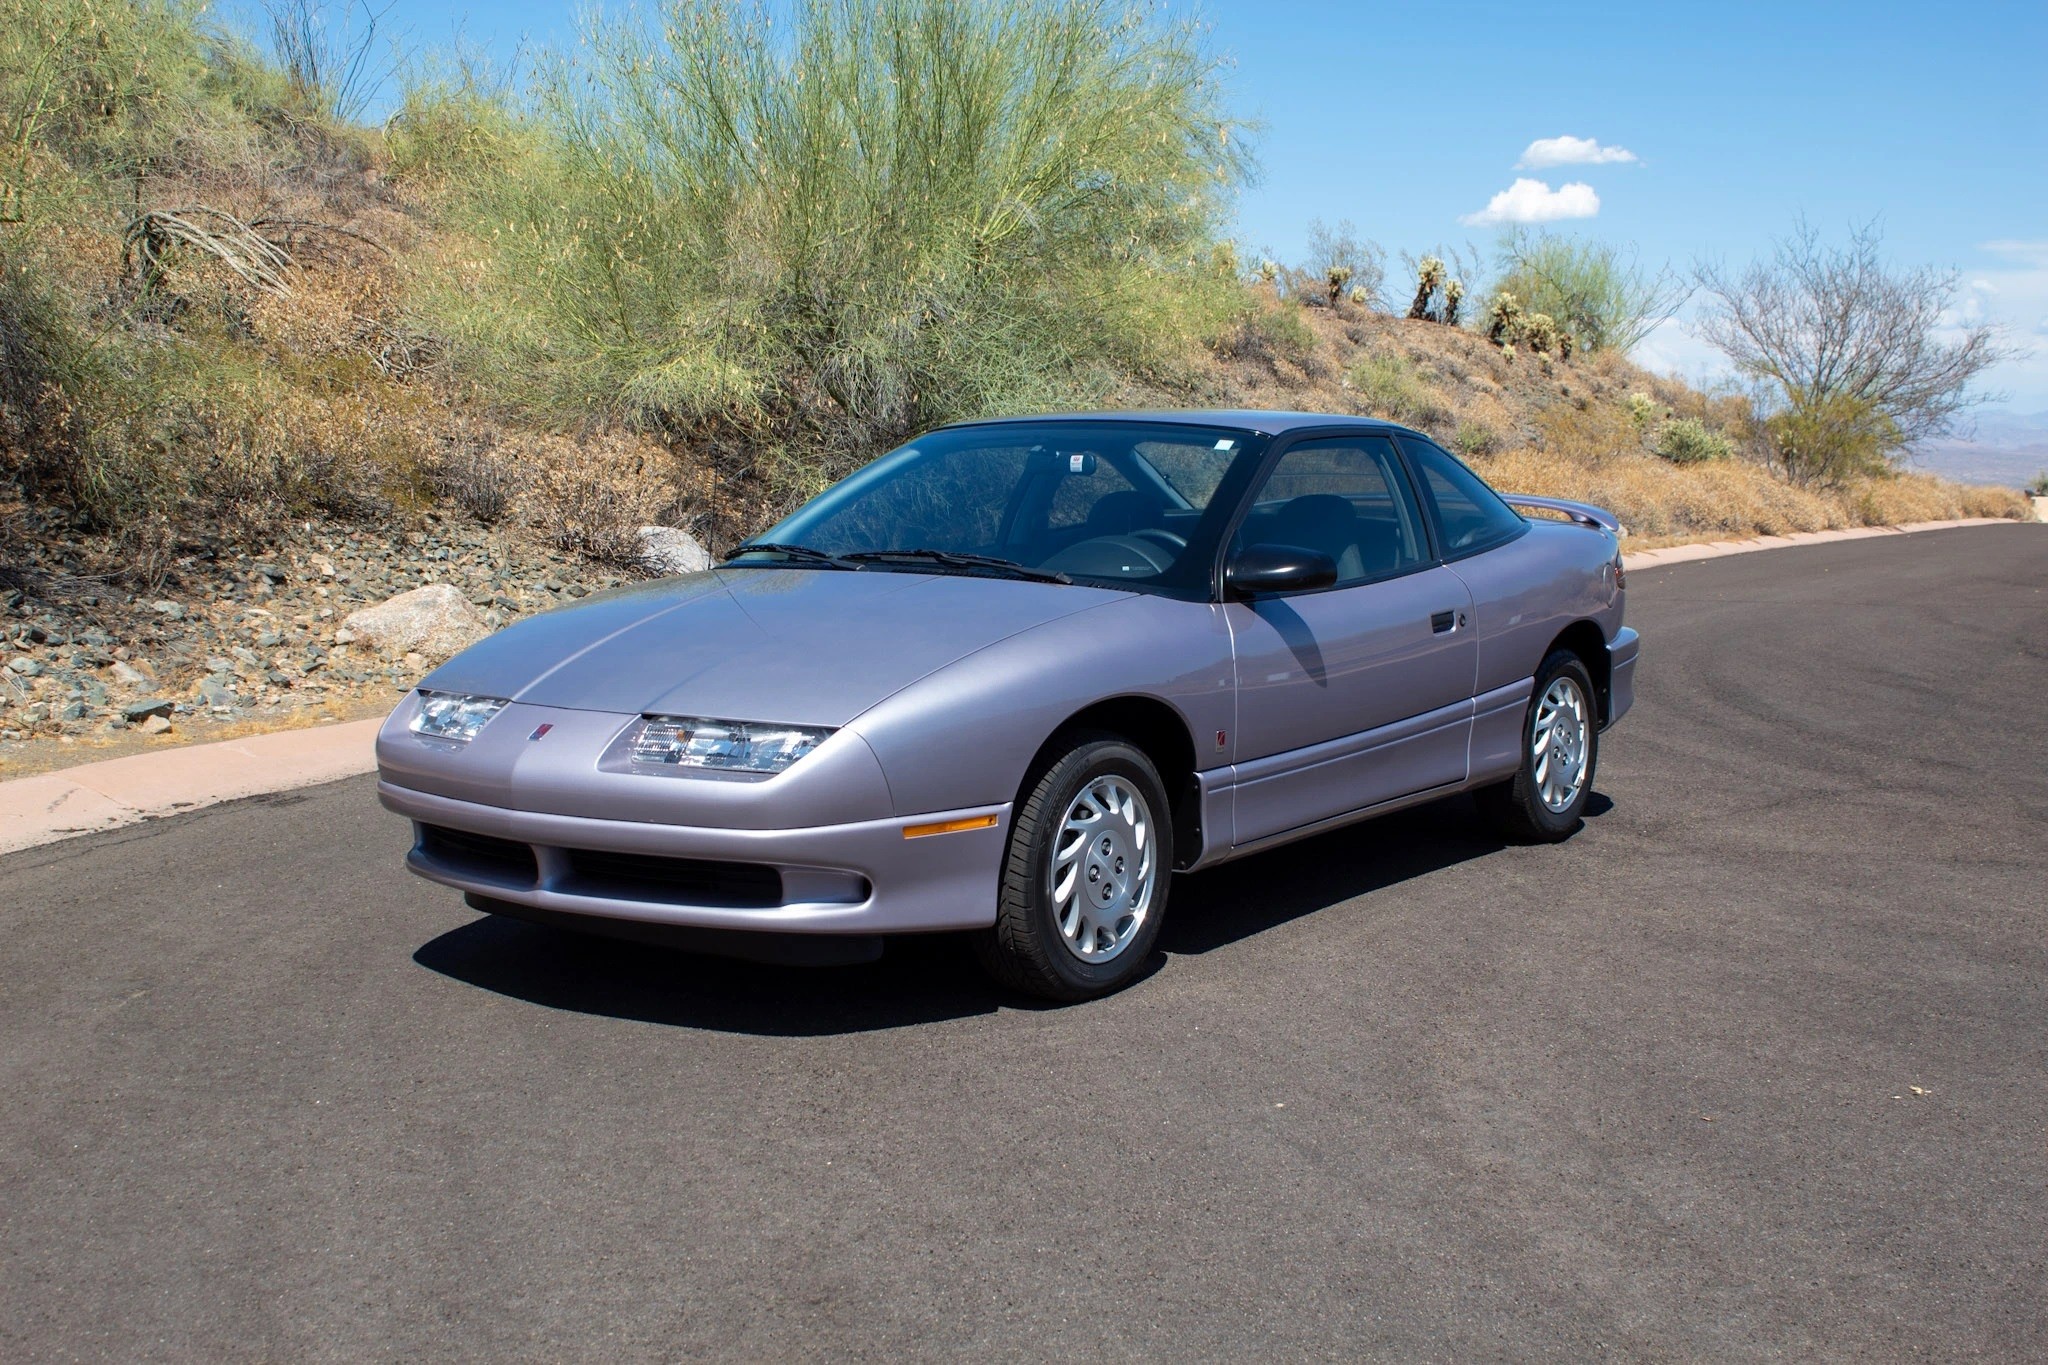 Very Clean 1995 Saturn SC1 Coupe Up For Sale